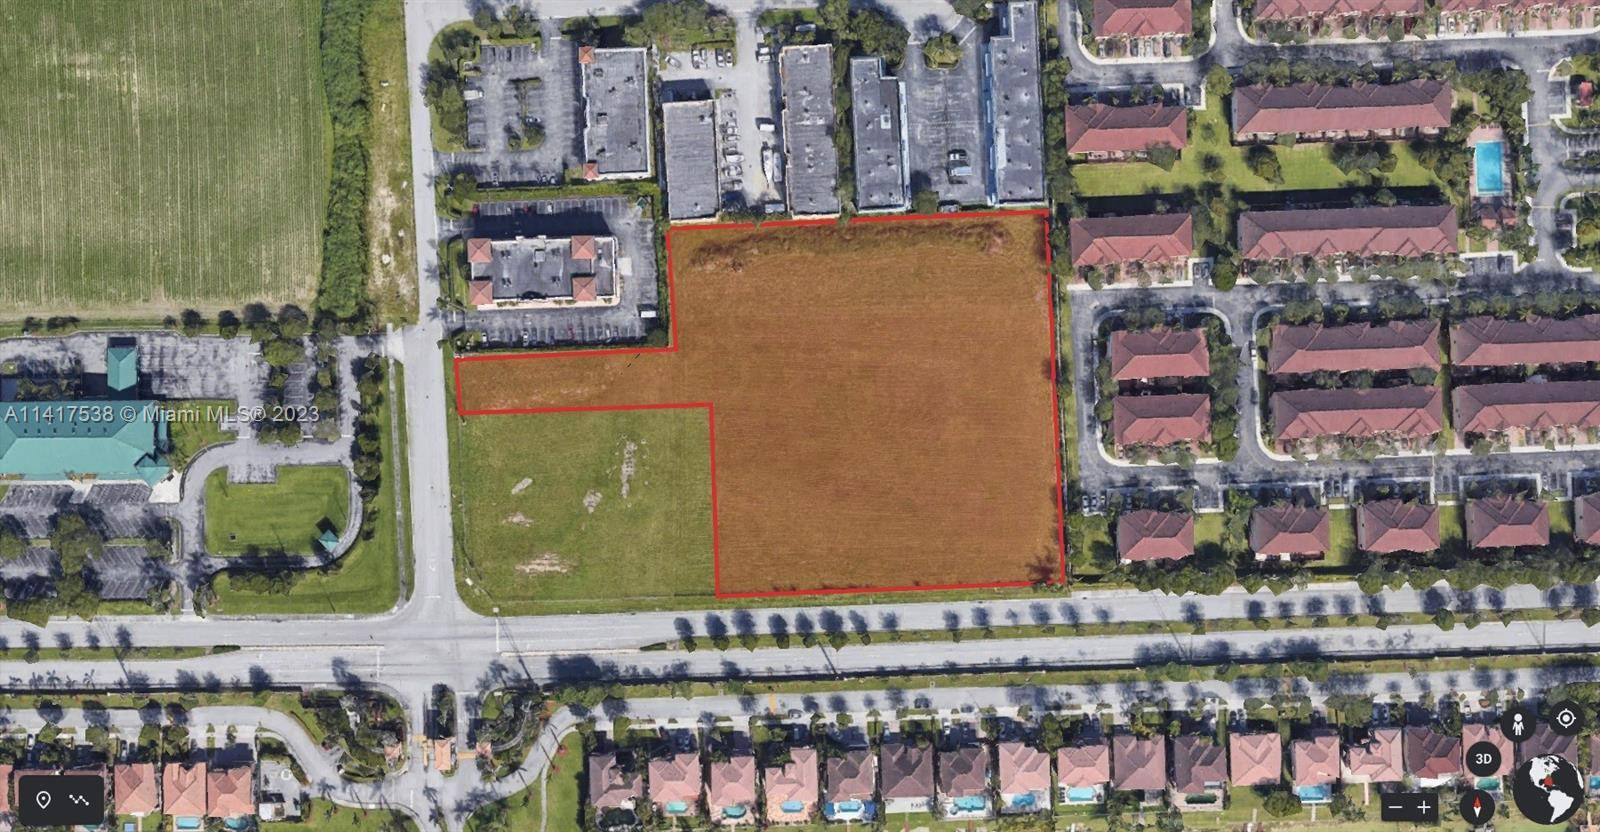 Centrally located 3. 7 Acre vacant parcel in Three Lakes SW 132 AVE 136 ST.